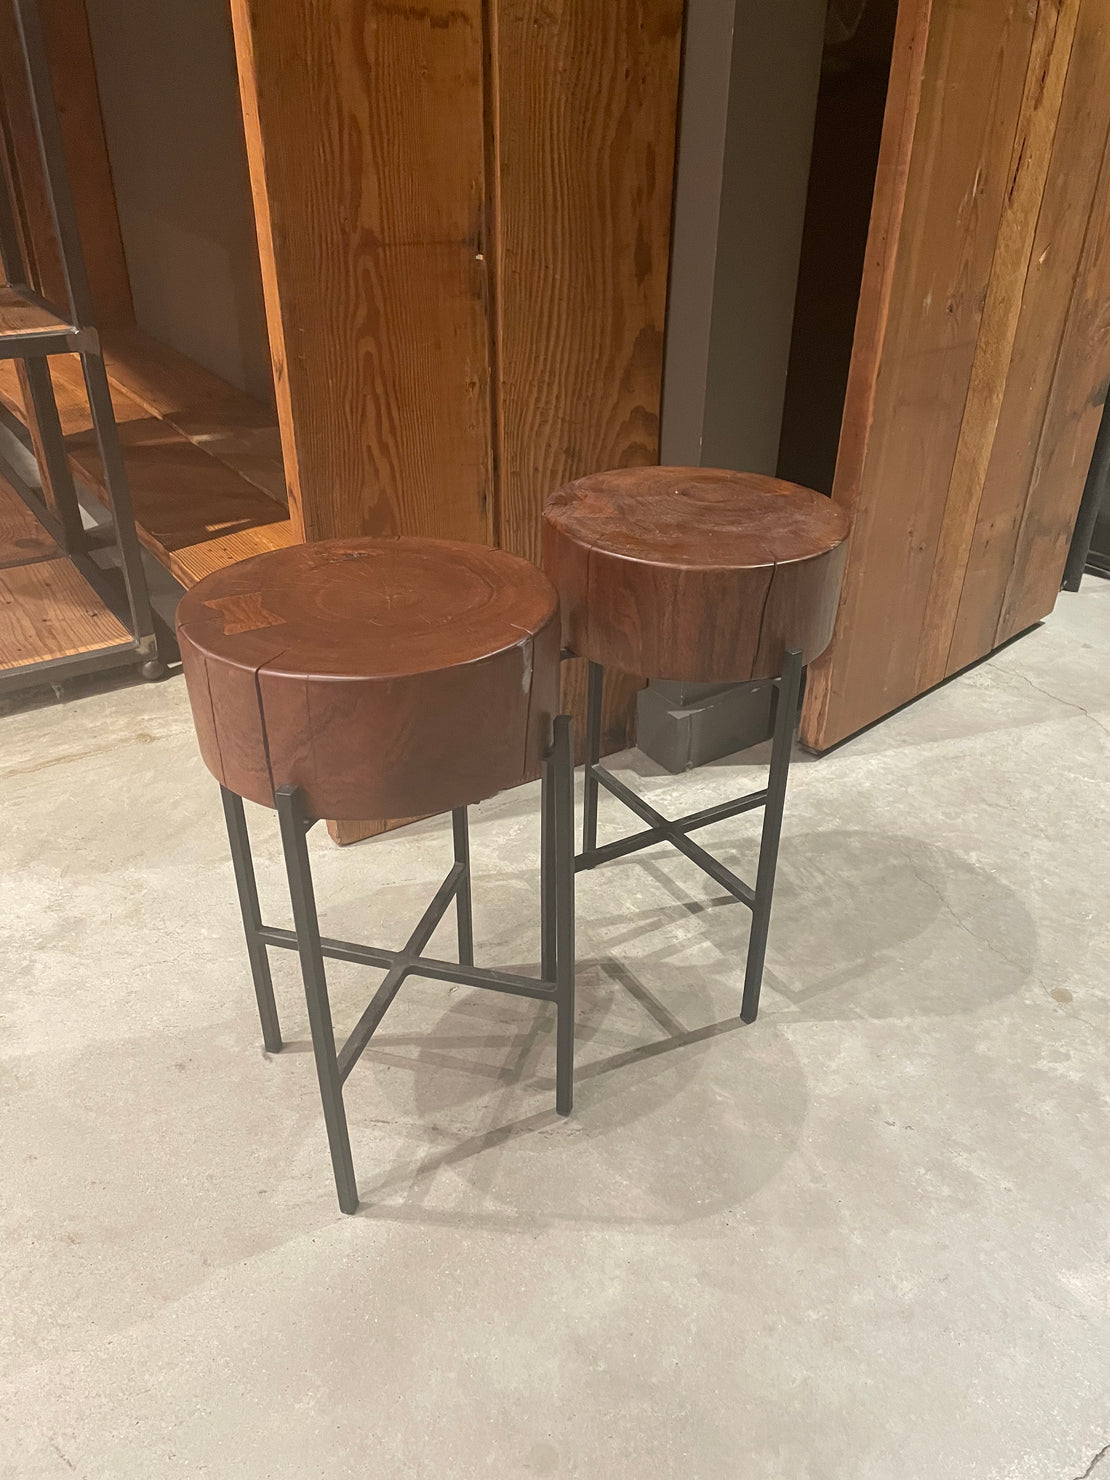 Warehouse Sale DNS 41 - Wooden Stool Set Small